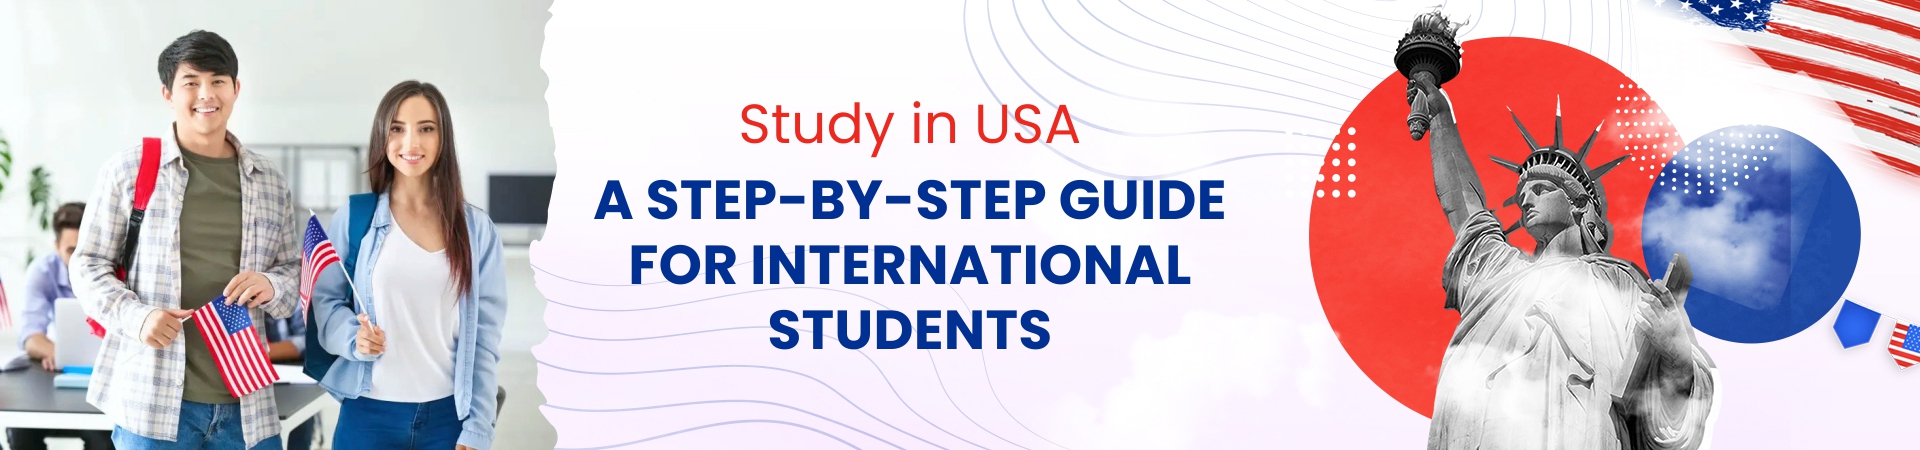 Study in USA: A Step-by-Step Guide for International Students